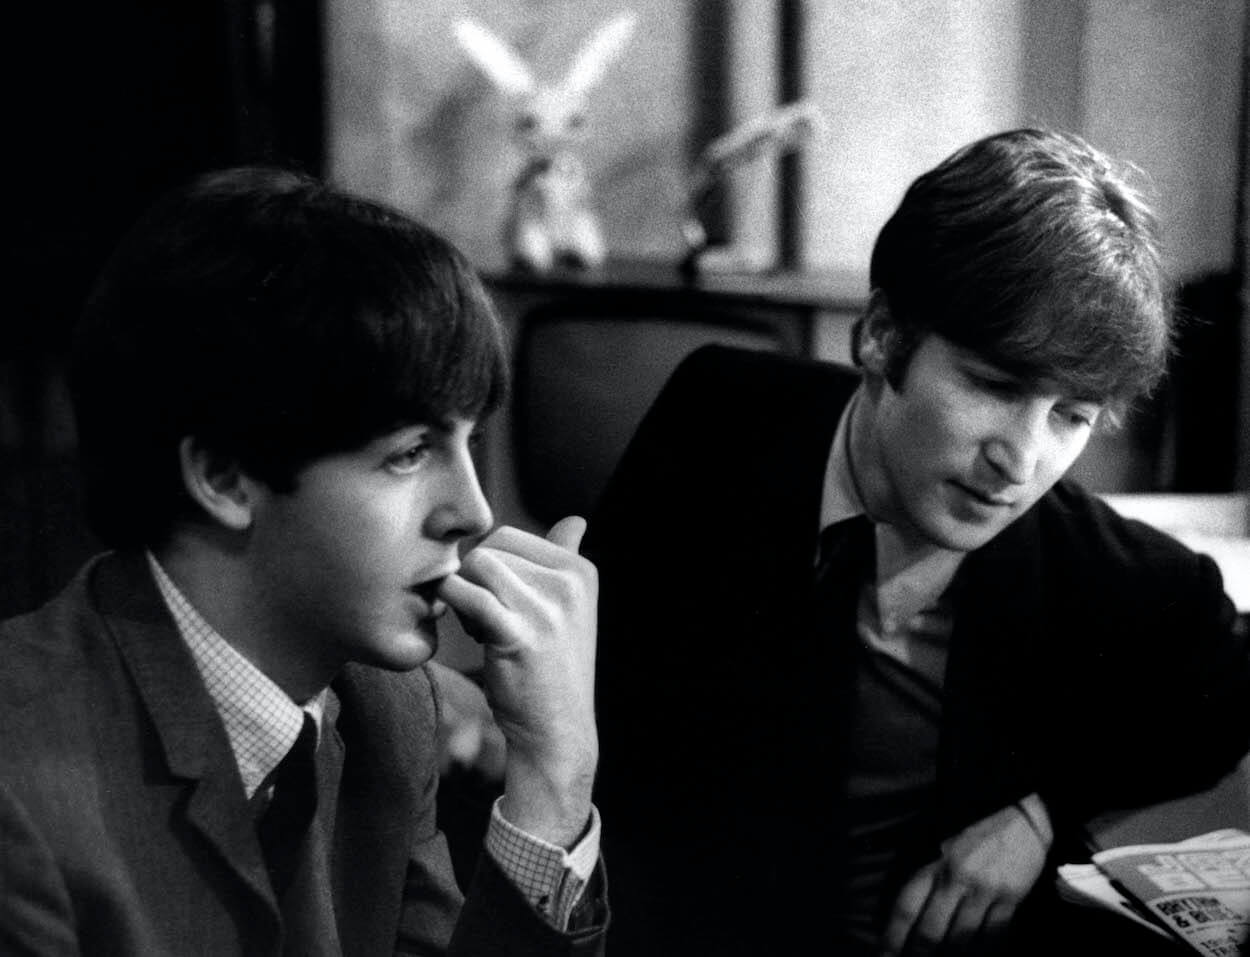 Paul McCartney and John Lennon seated together in late 1963.